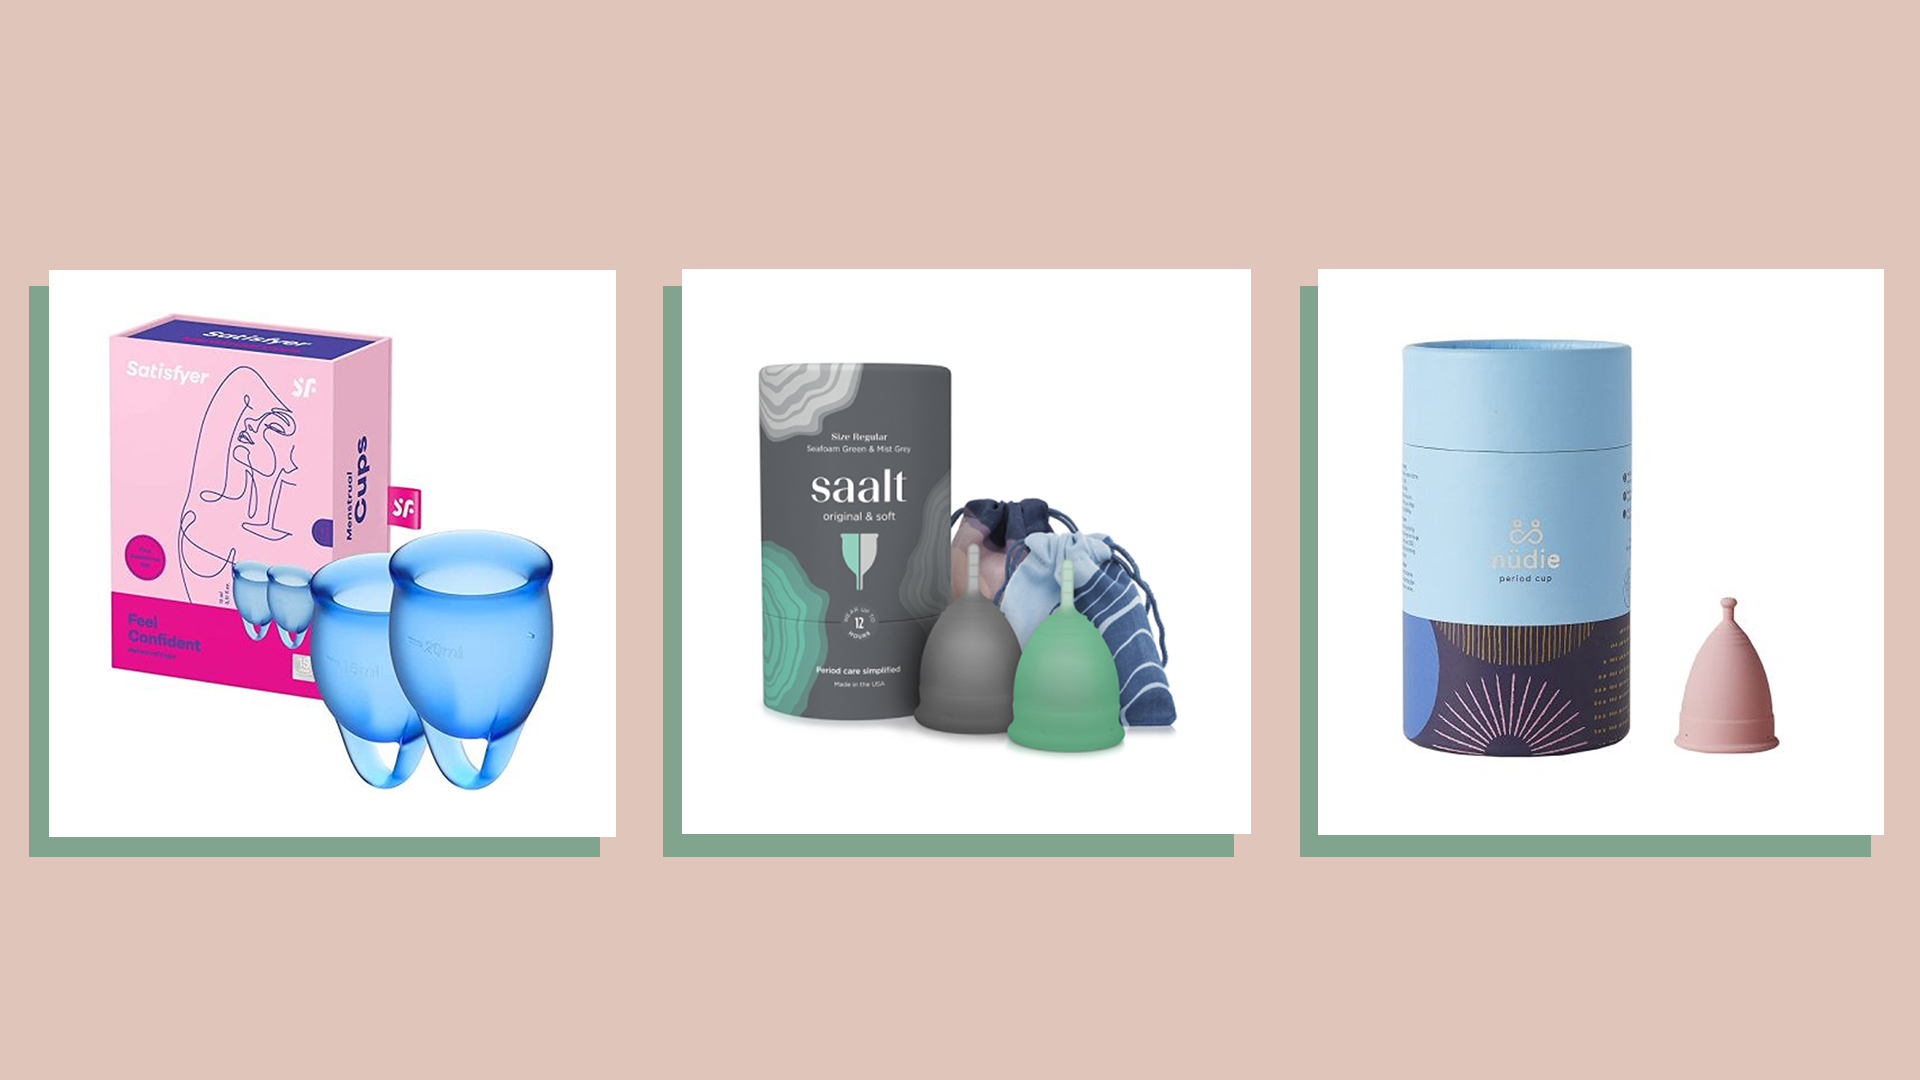 Portable Menstrual Cup Wipes : nixit wipe